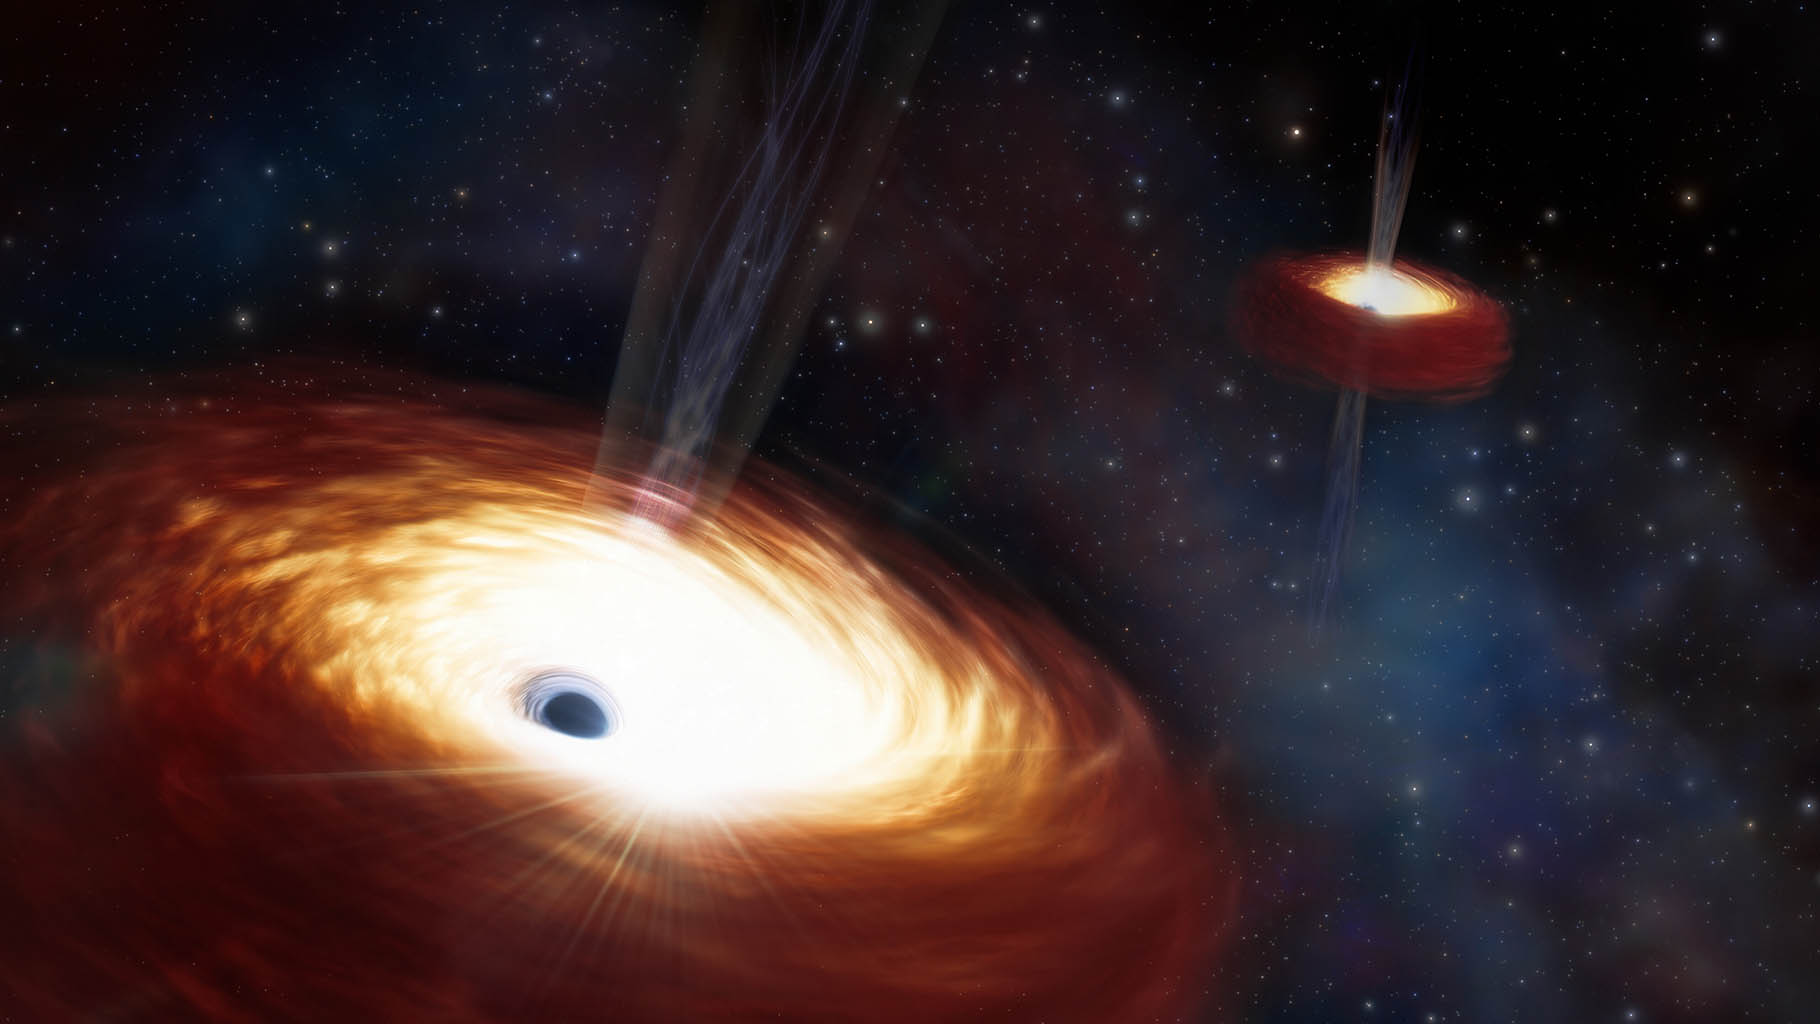 Artist impression of a swirling black hole with light yellow and orange around it.